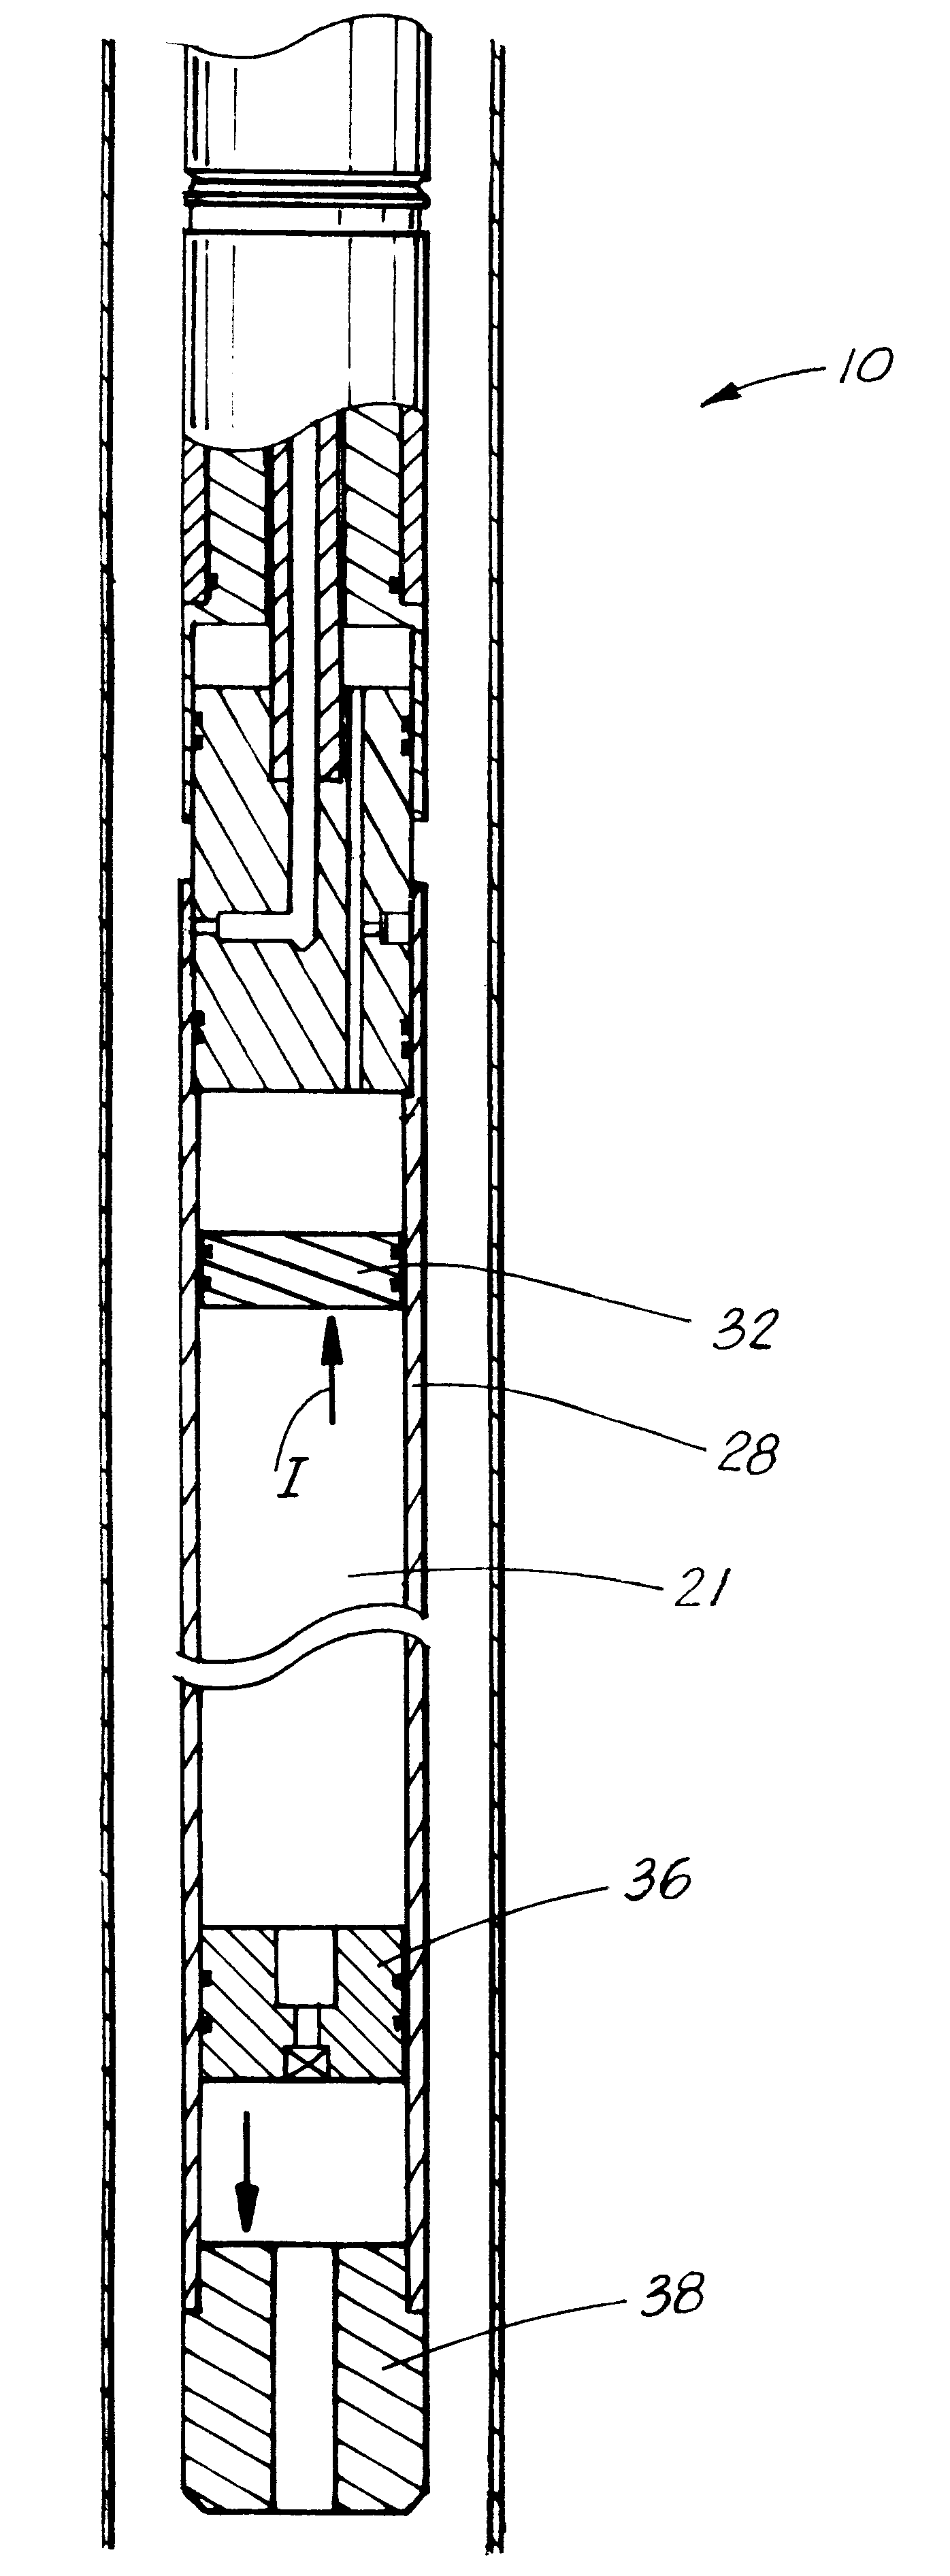 Gas operated apparatus and method for maintaining relatively uniformed fluid pressure within an expandable well tool subjected to thermal variants